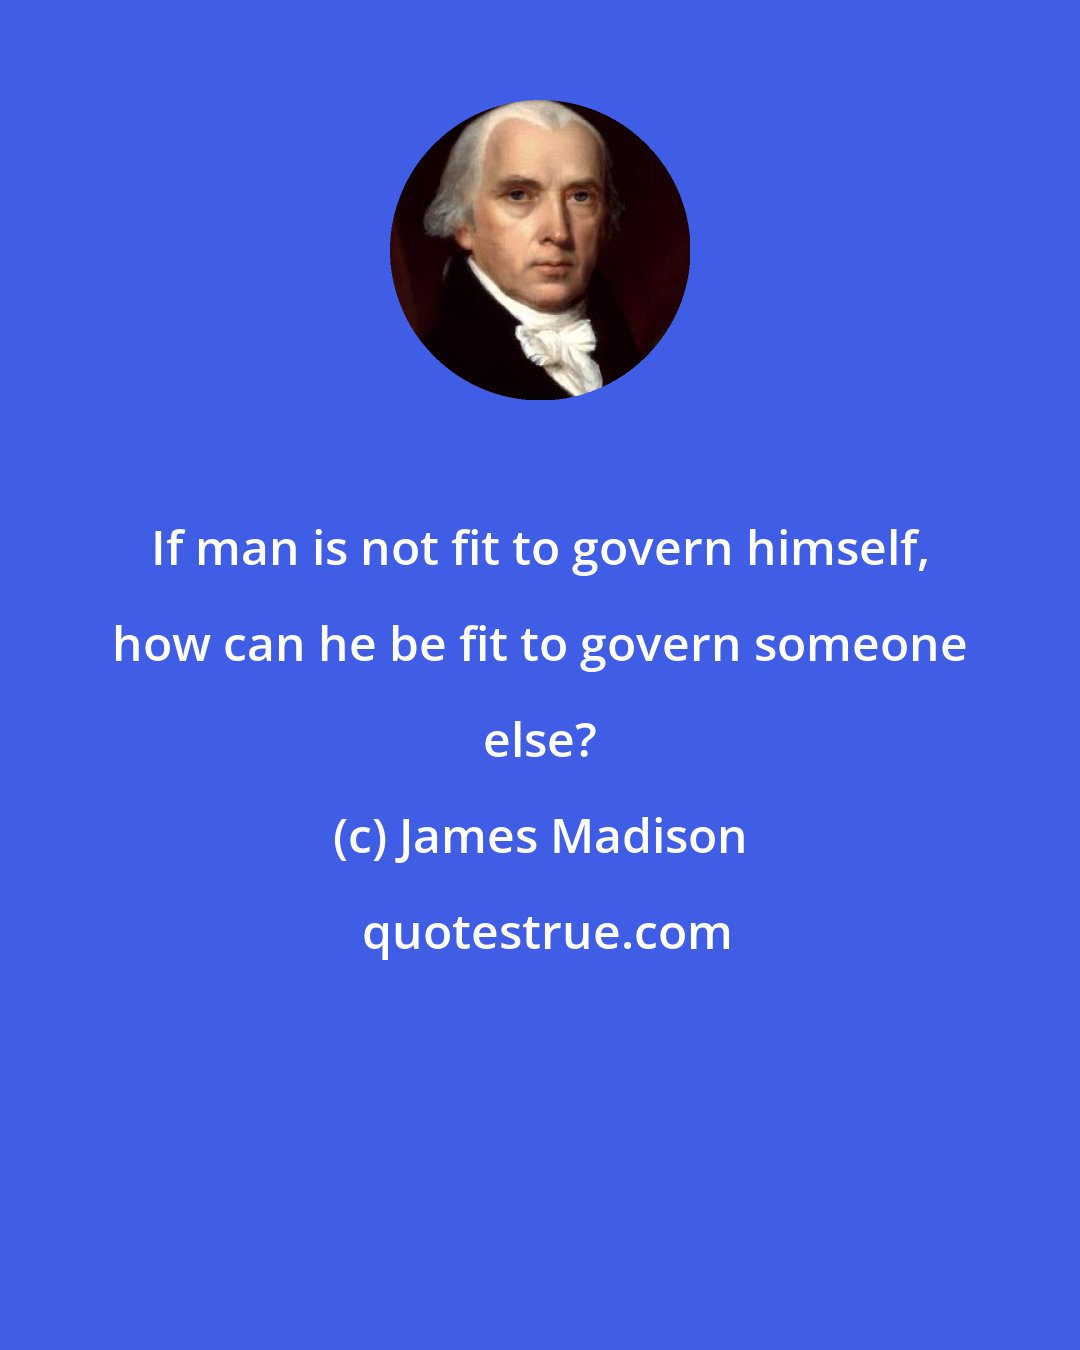 James Madison: If man is not fit to govern himself, how can he be fit to govern someone else?